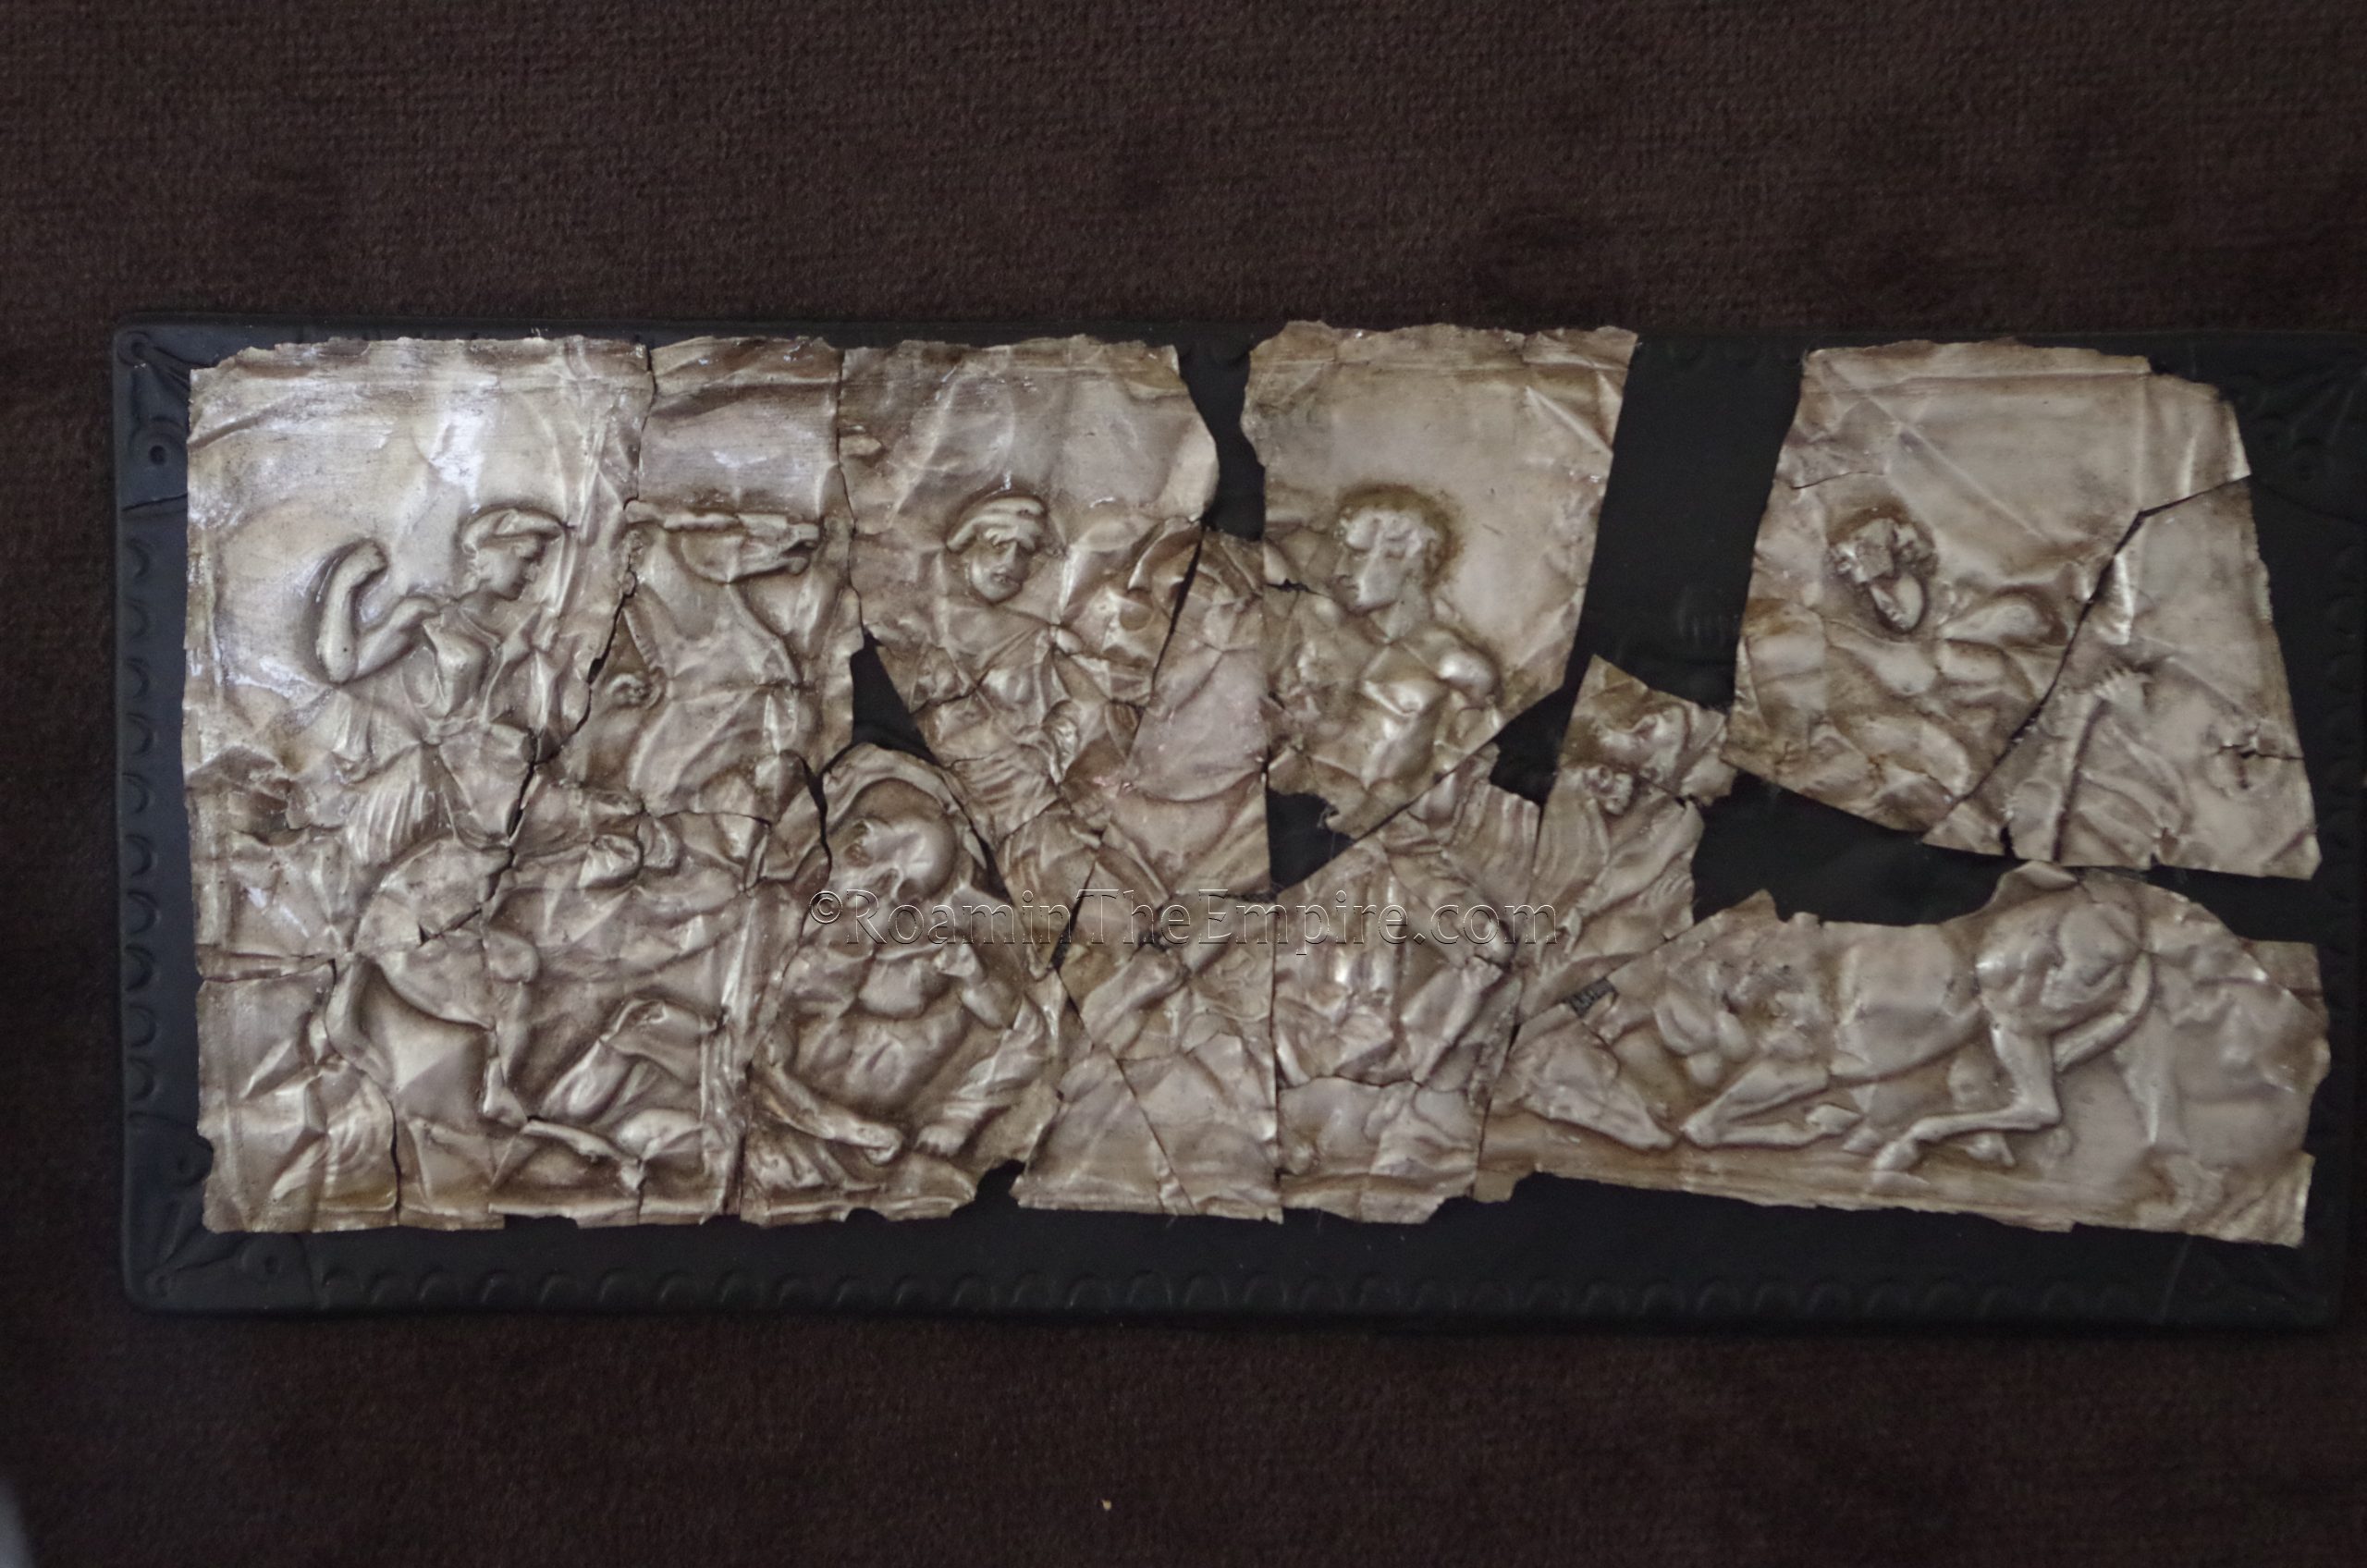 Relief of a battle scene in the Trakart Research Center.